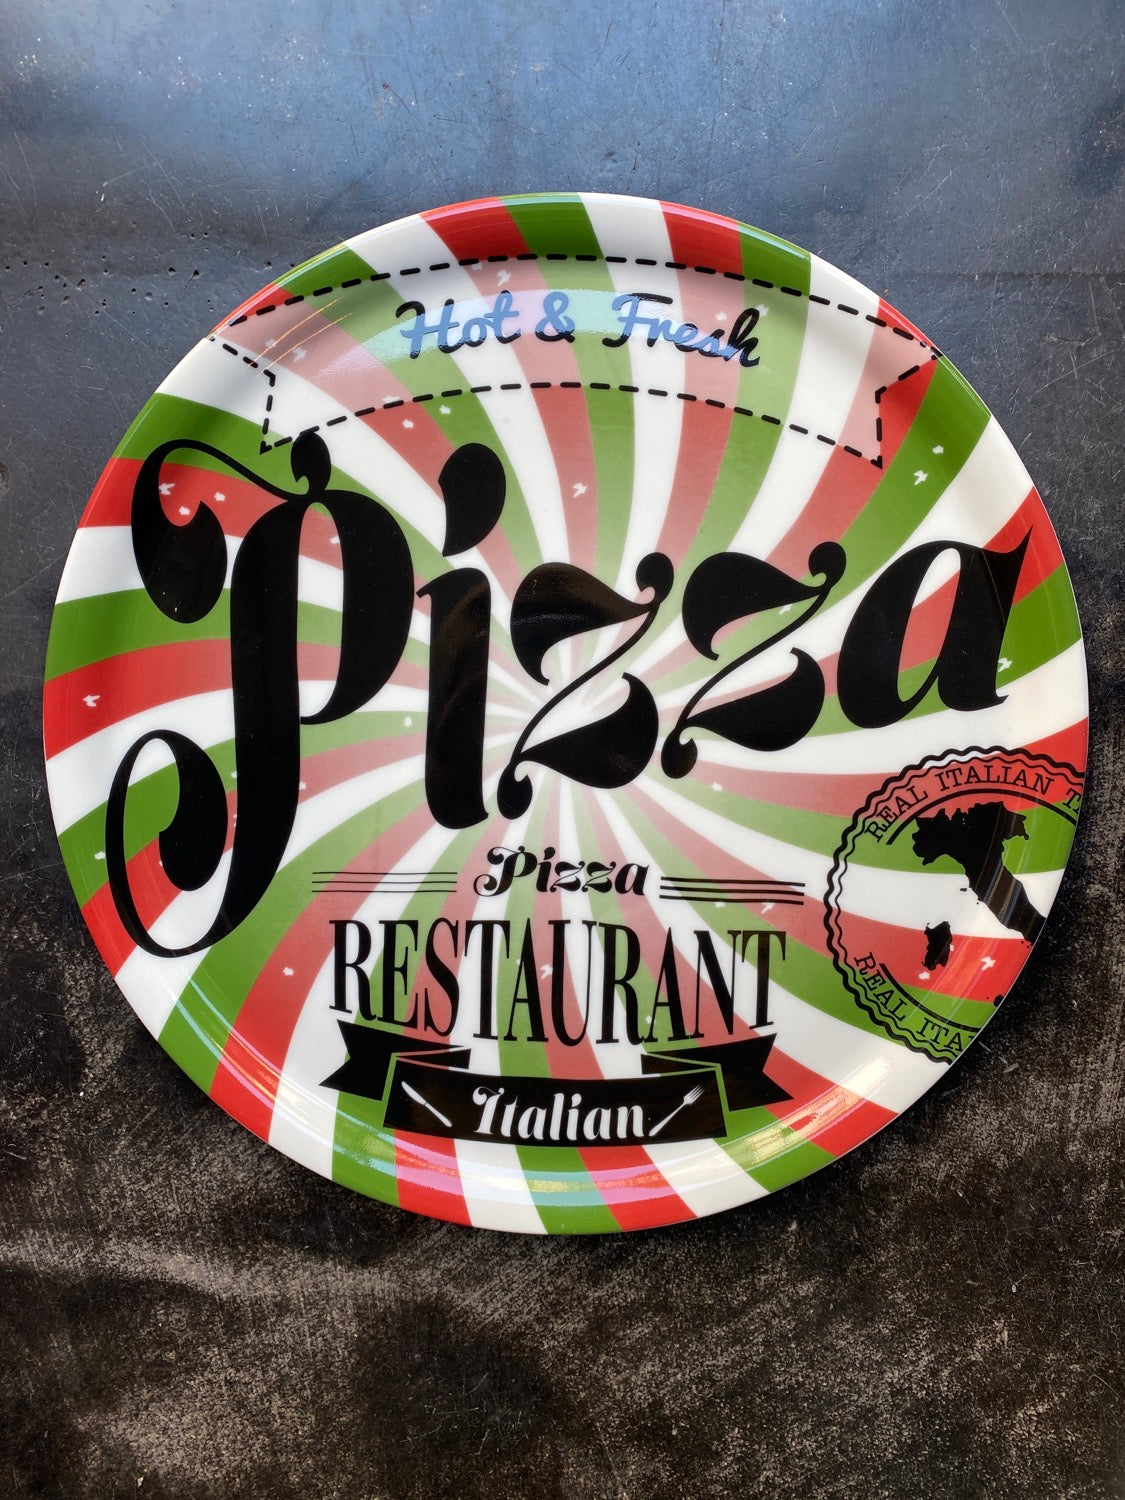 Pizza plate